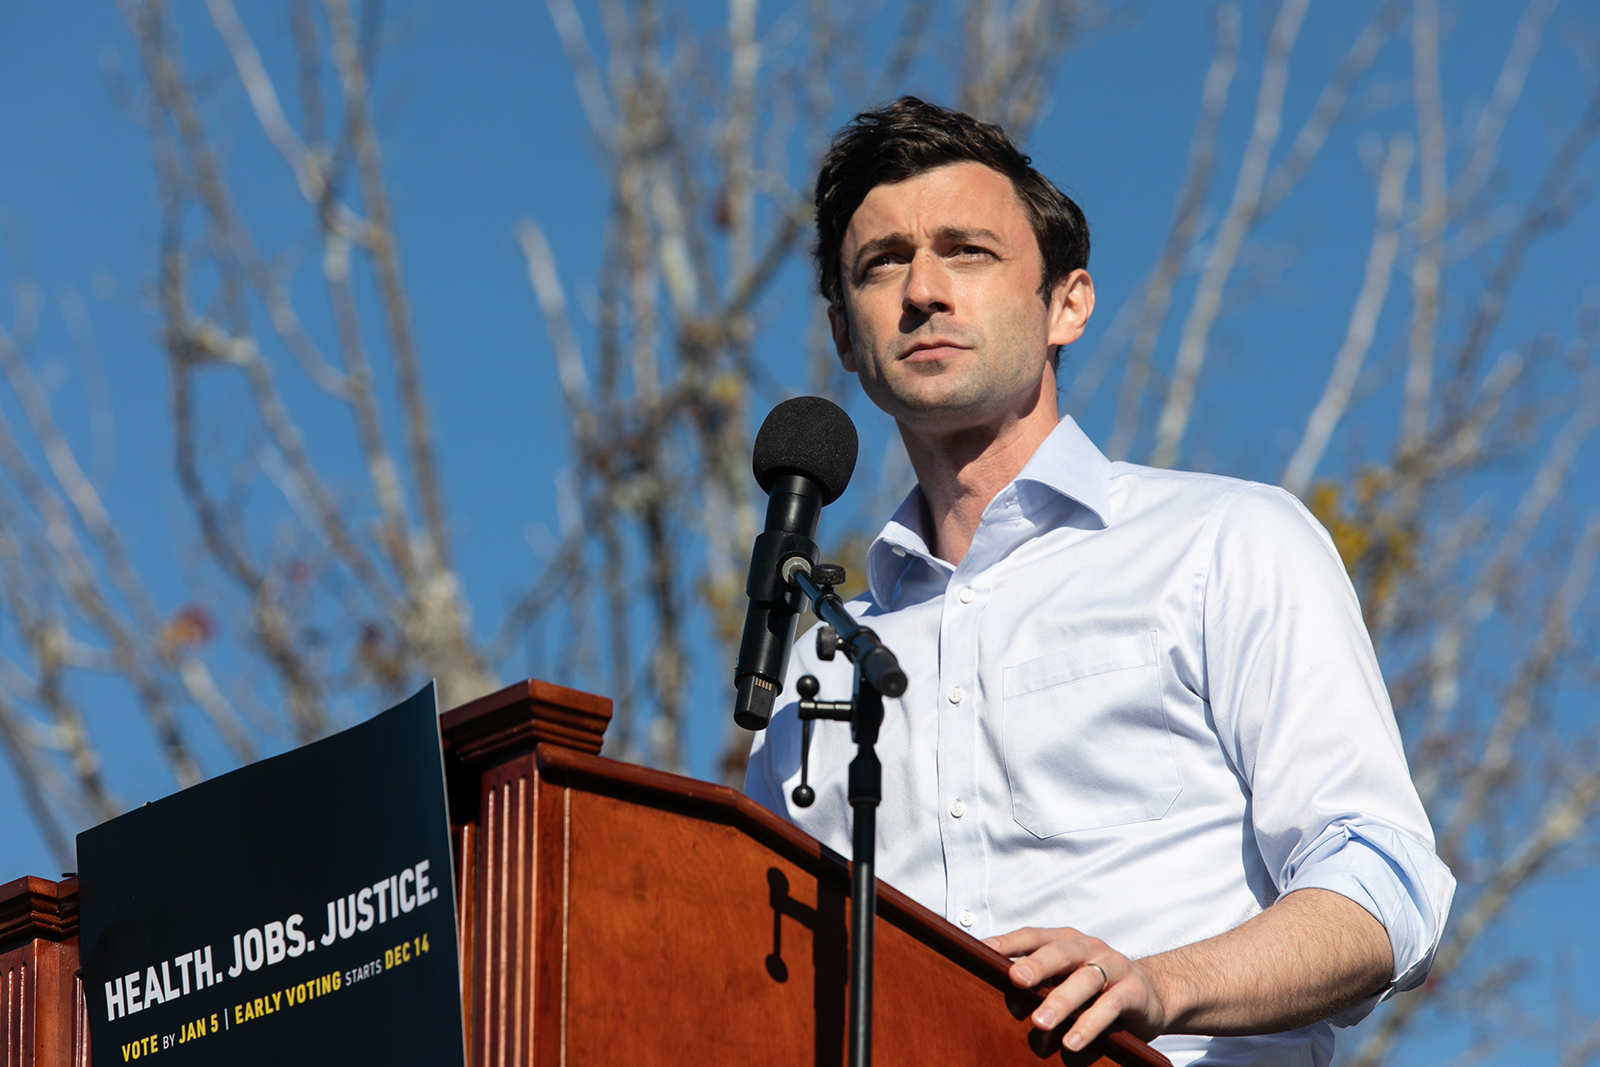 Senate candidate Jon Ossoff speaks to the crowd during an outdoor drive-in rally on December 5, in Conyers, Georgia.